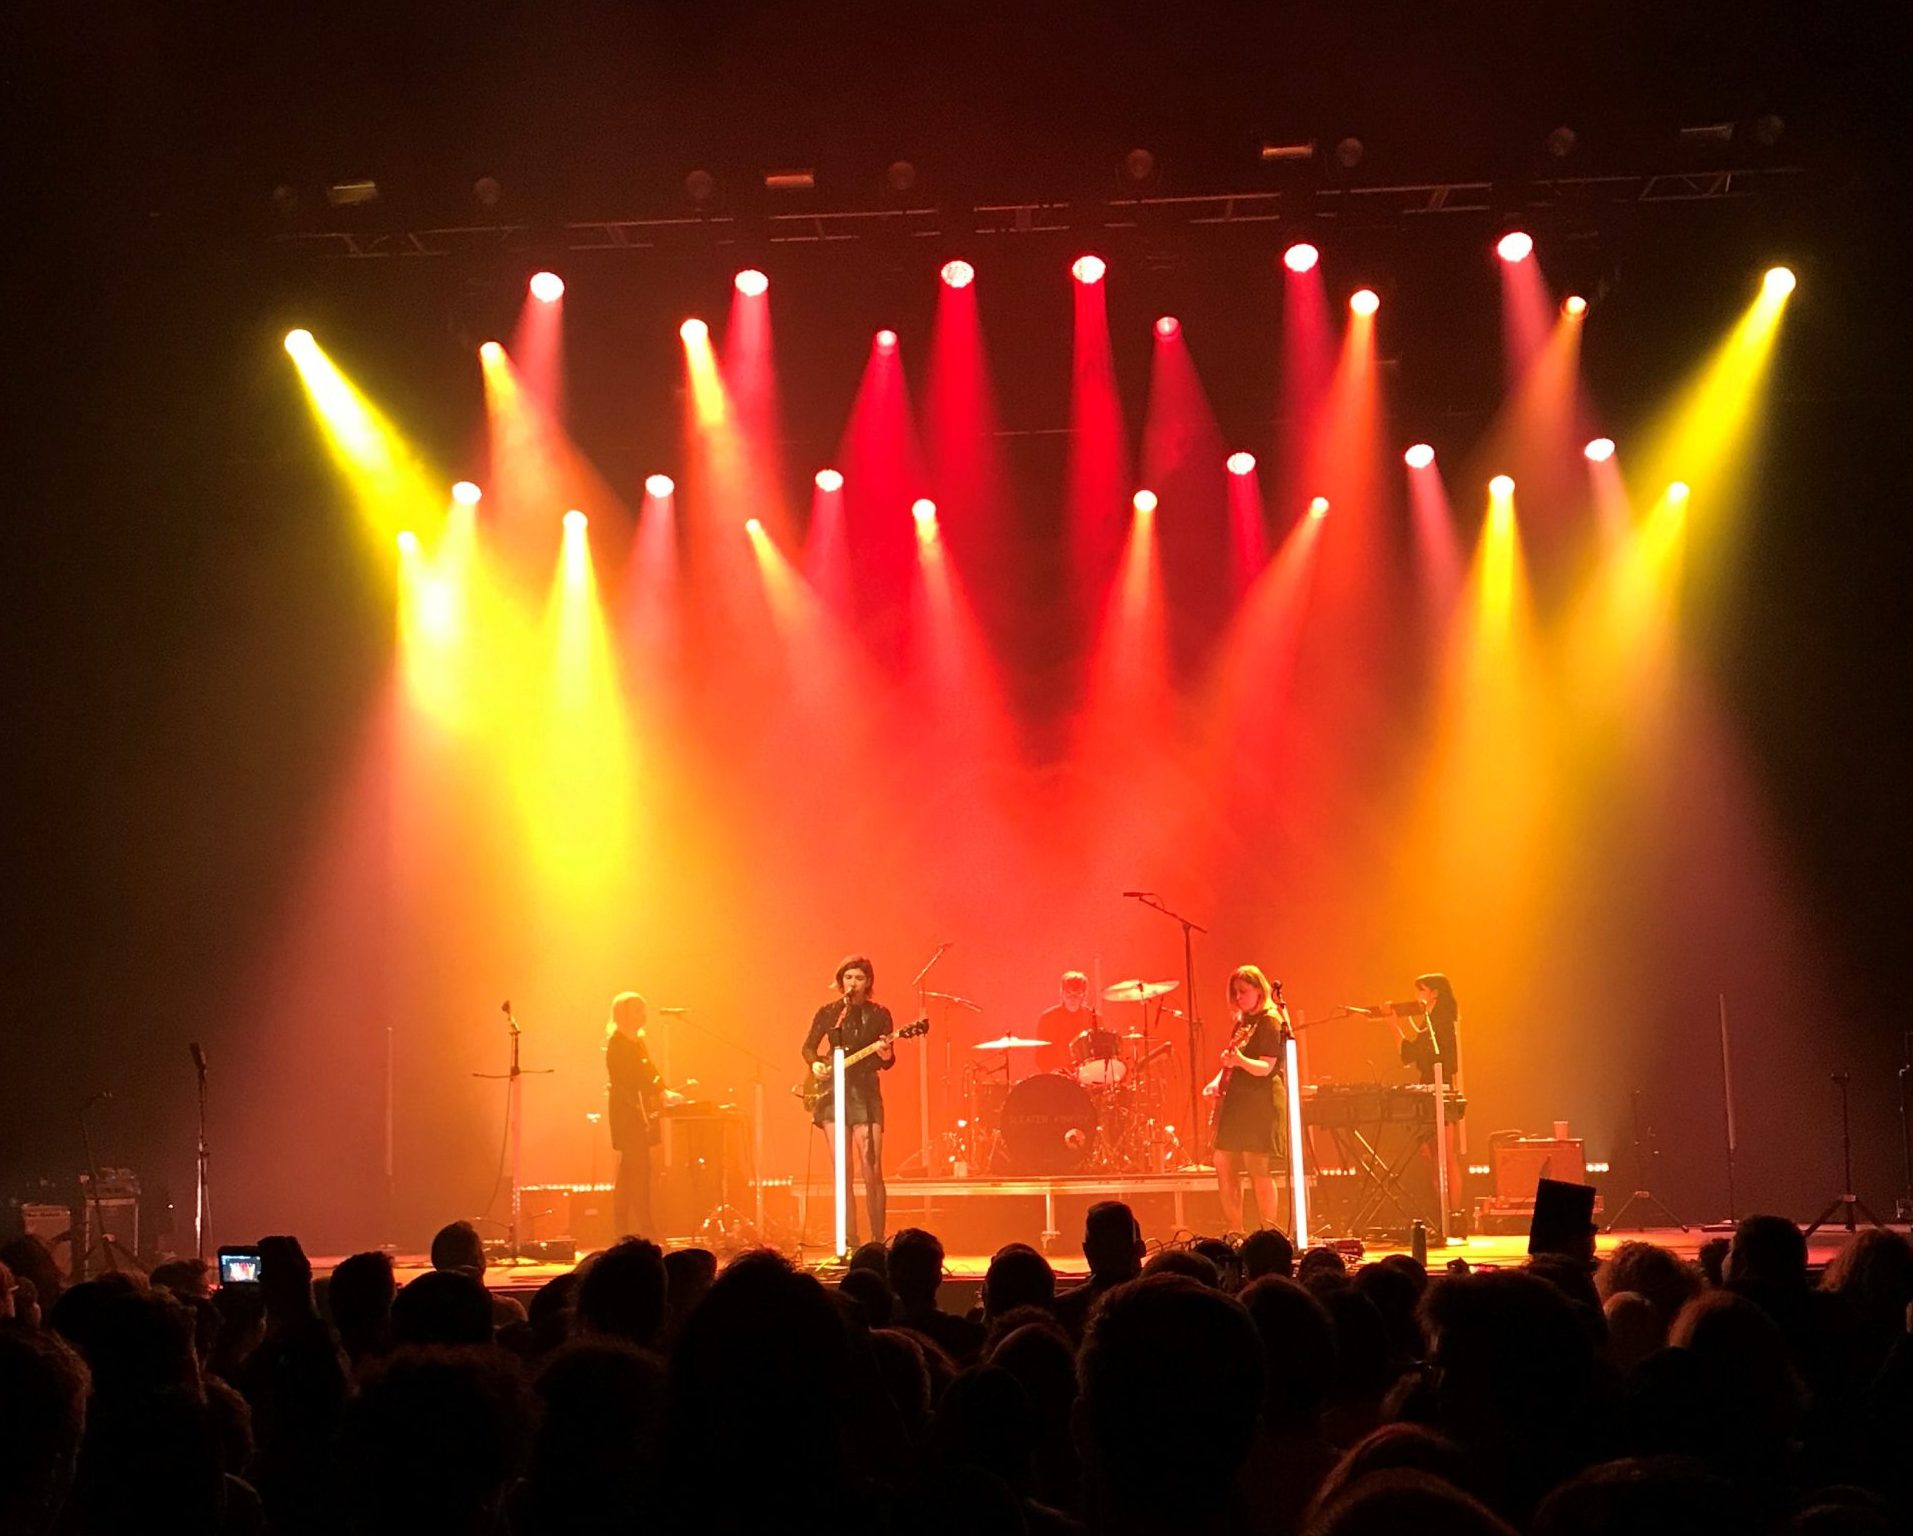 Rock band Sleater-Kinney perform at the Fox Theater in Oakland. Members are Katie Harkin, Carrie Brownstein, Angie Boylan, Corin Tucker and Toko Yasuda.